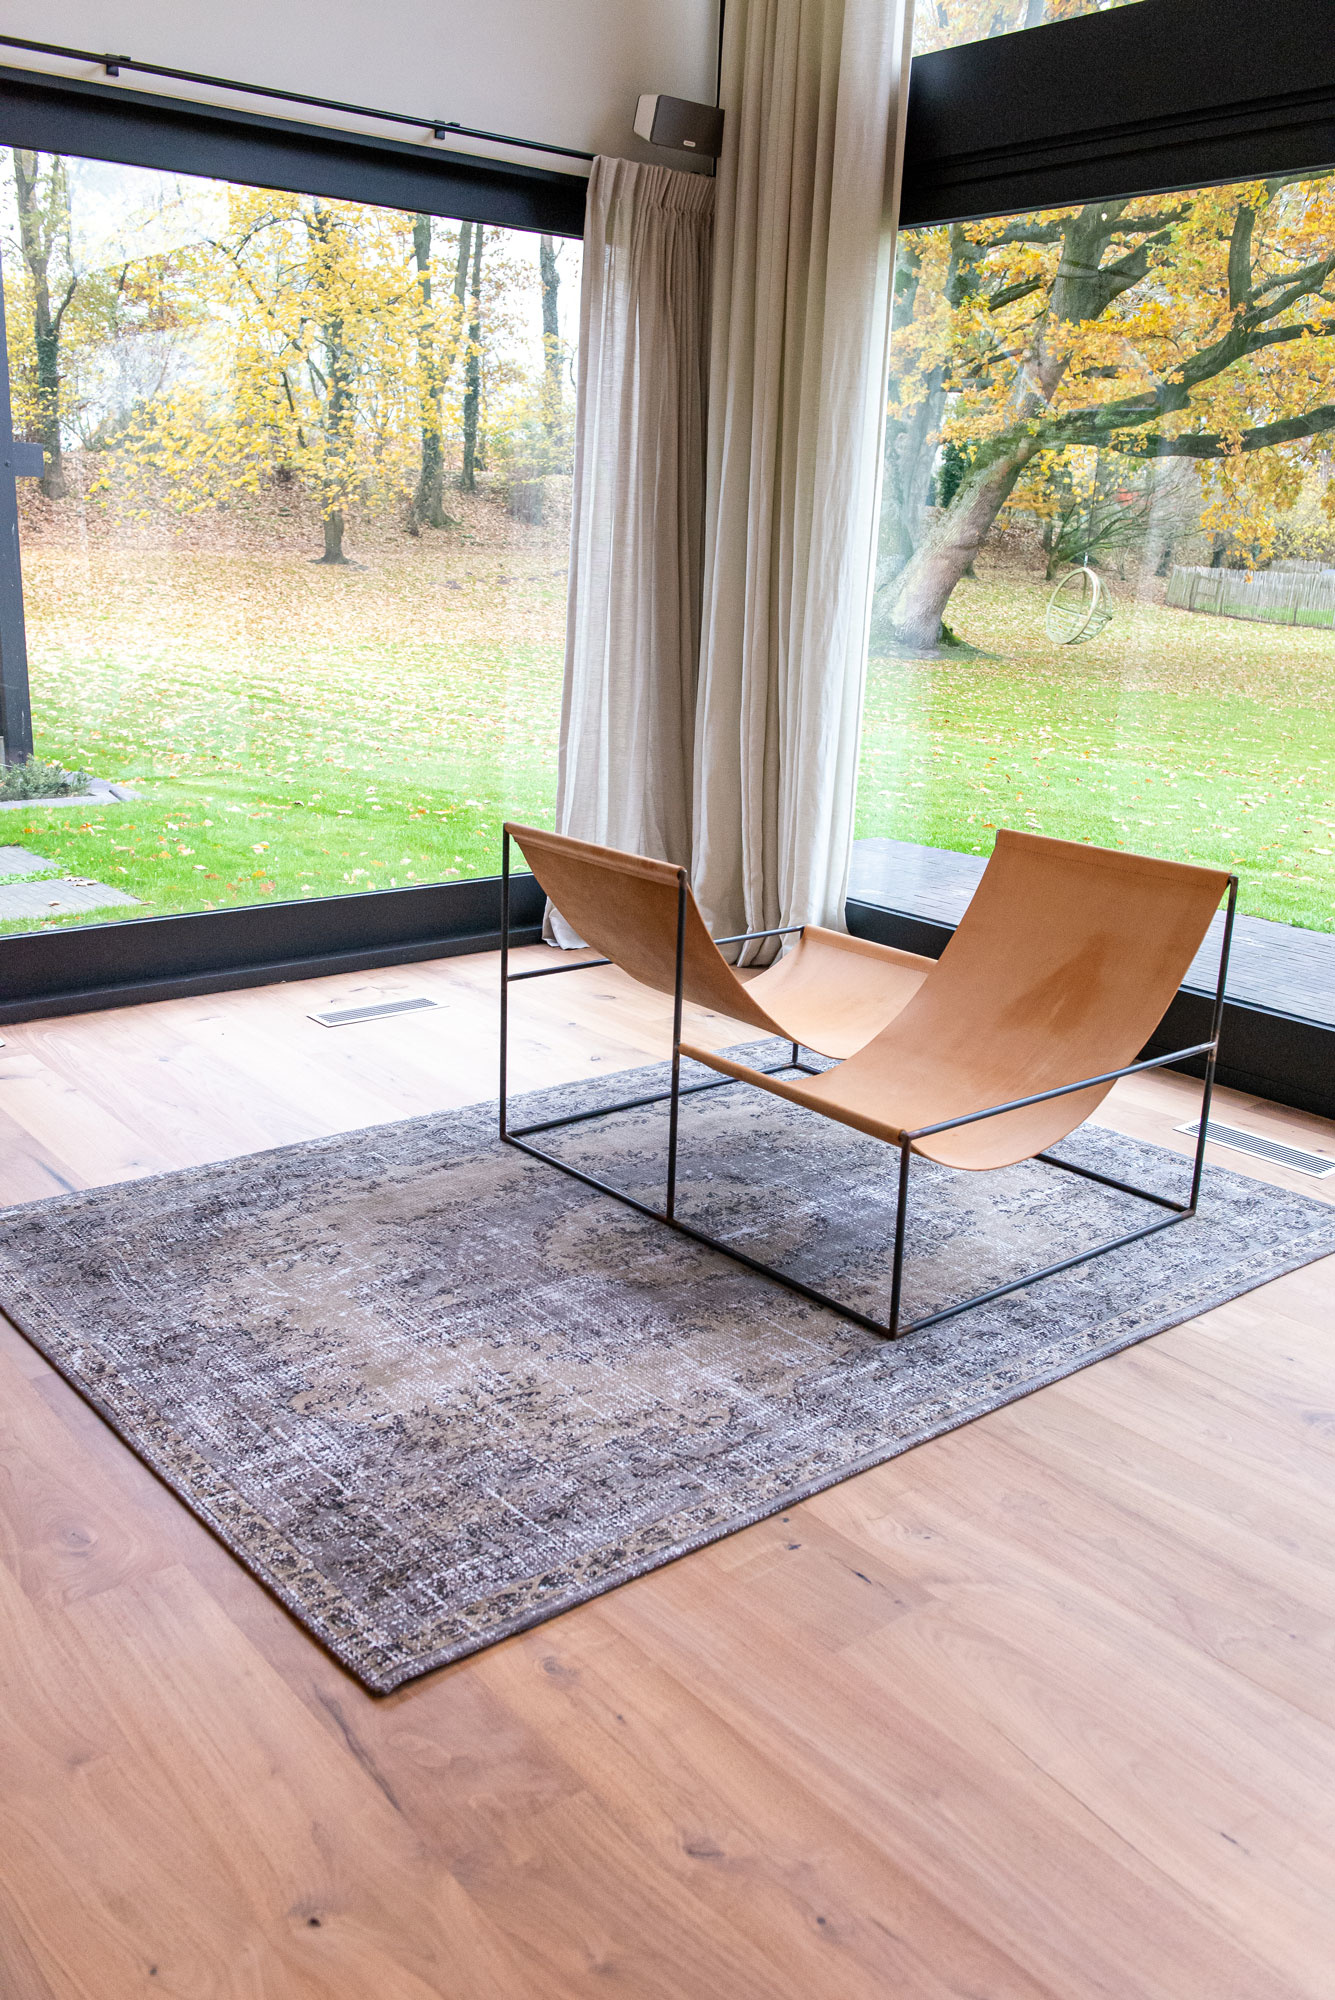 Colonna Taupe 9138 Rug